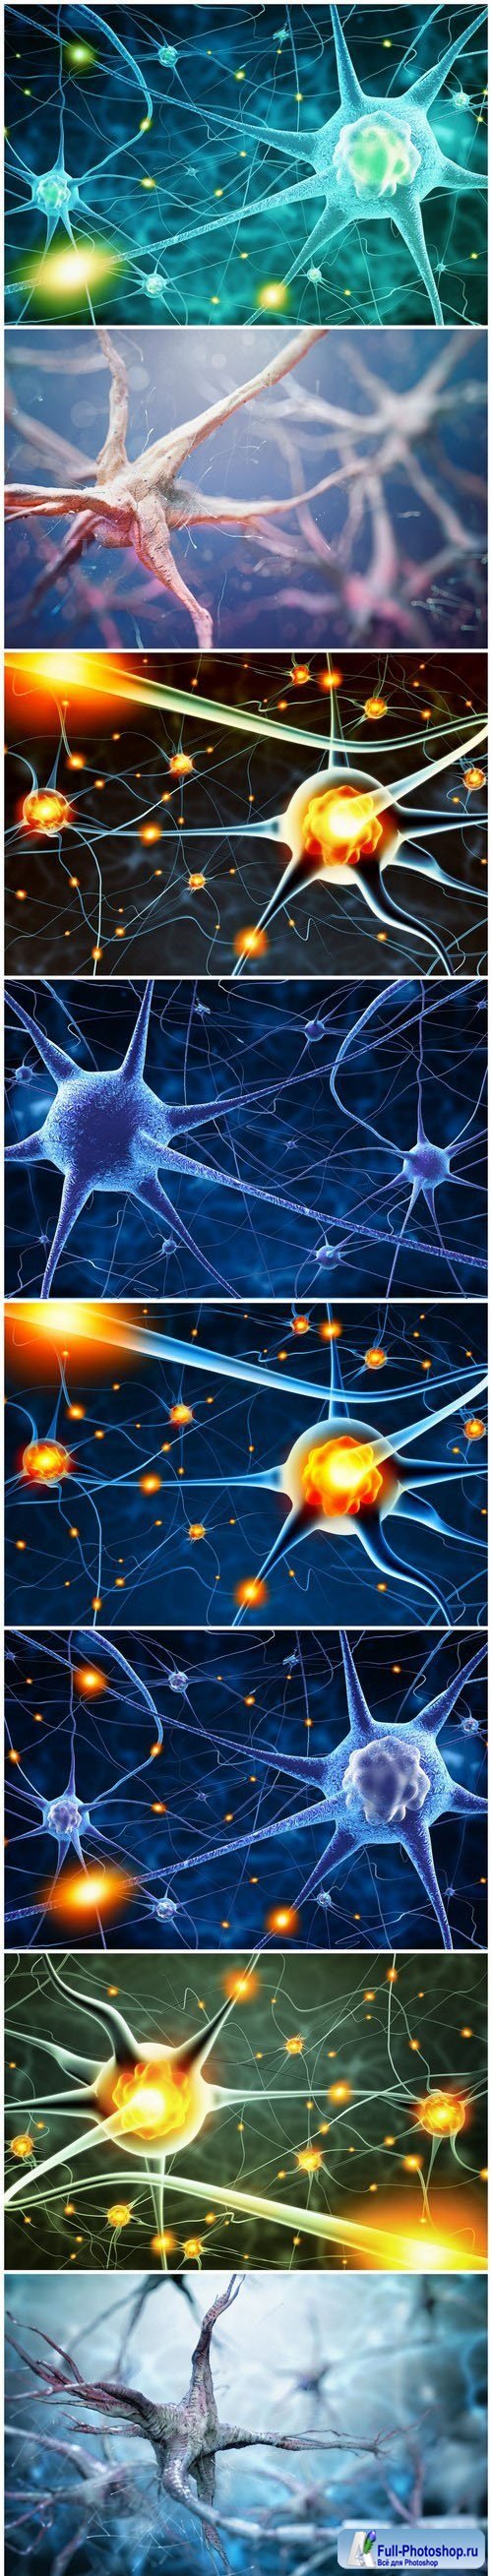 Active nerve cells - Set of 8xUHQ JPEG Professional Stock Images